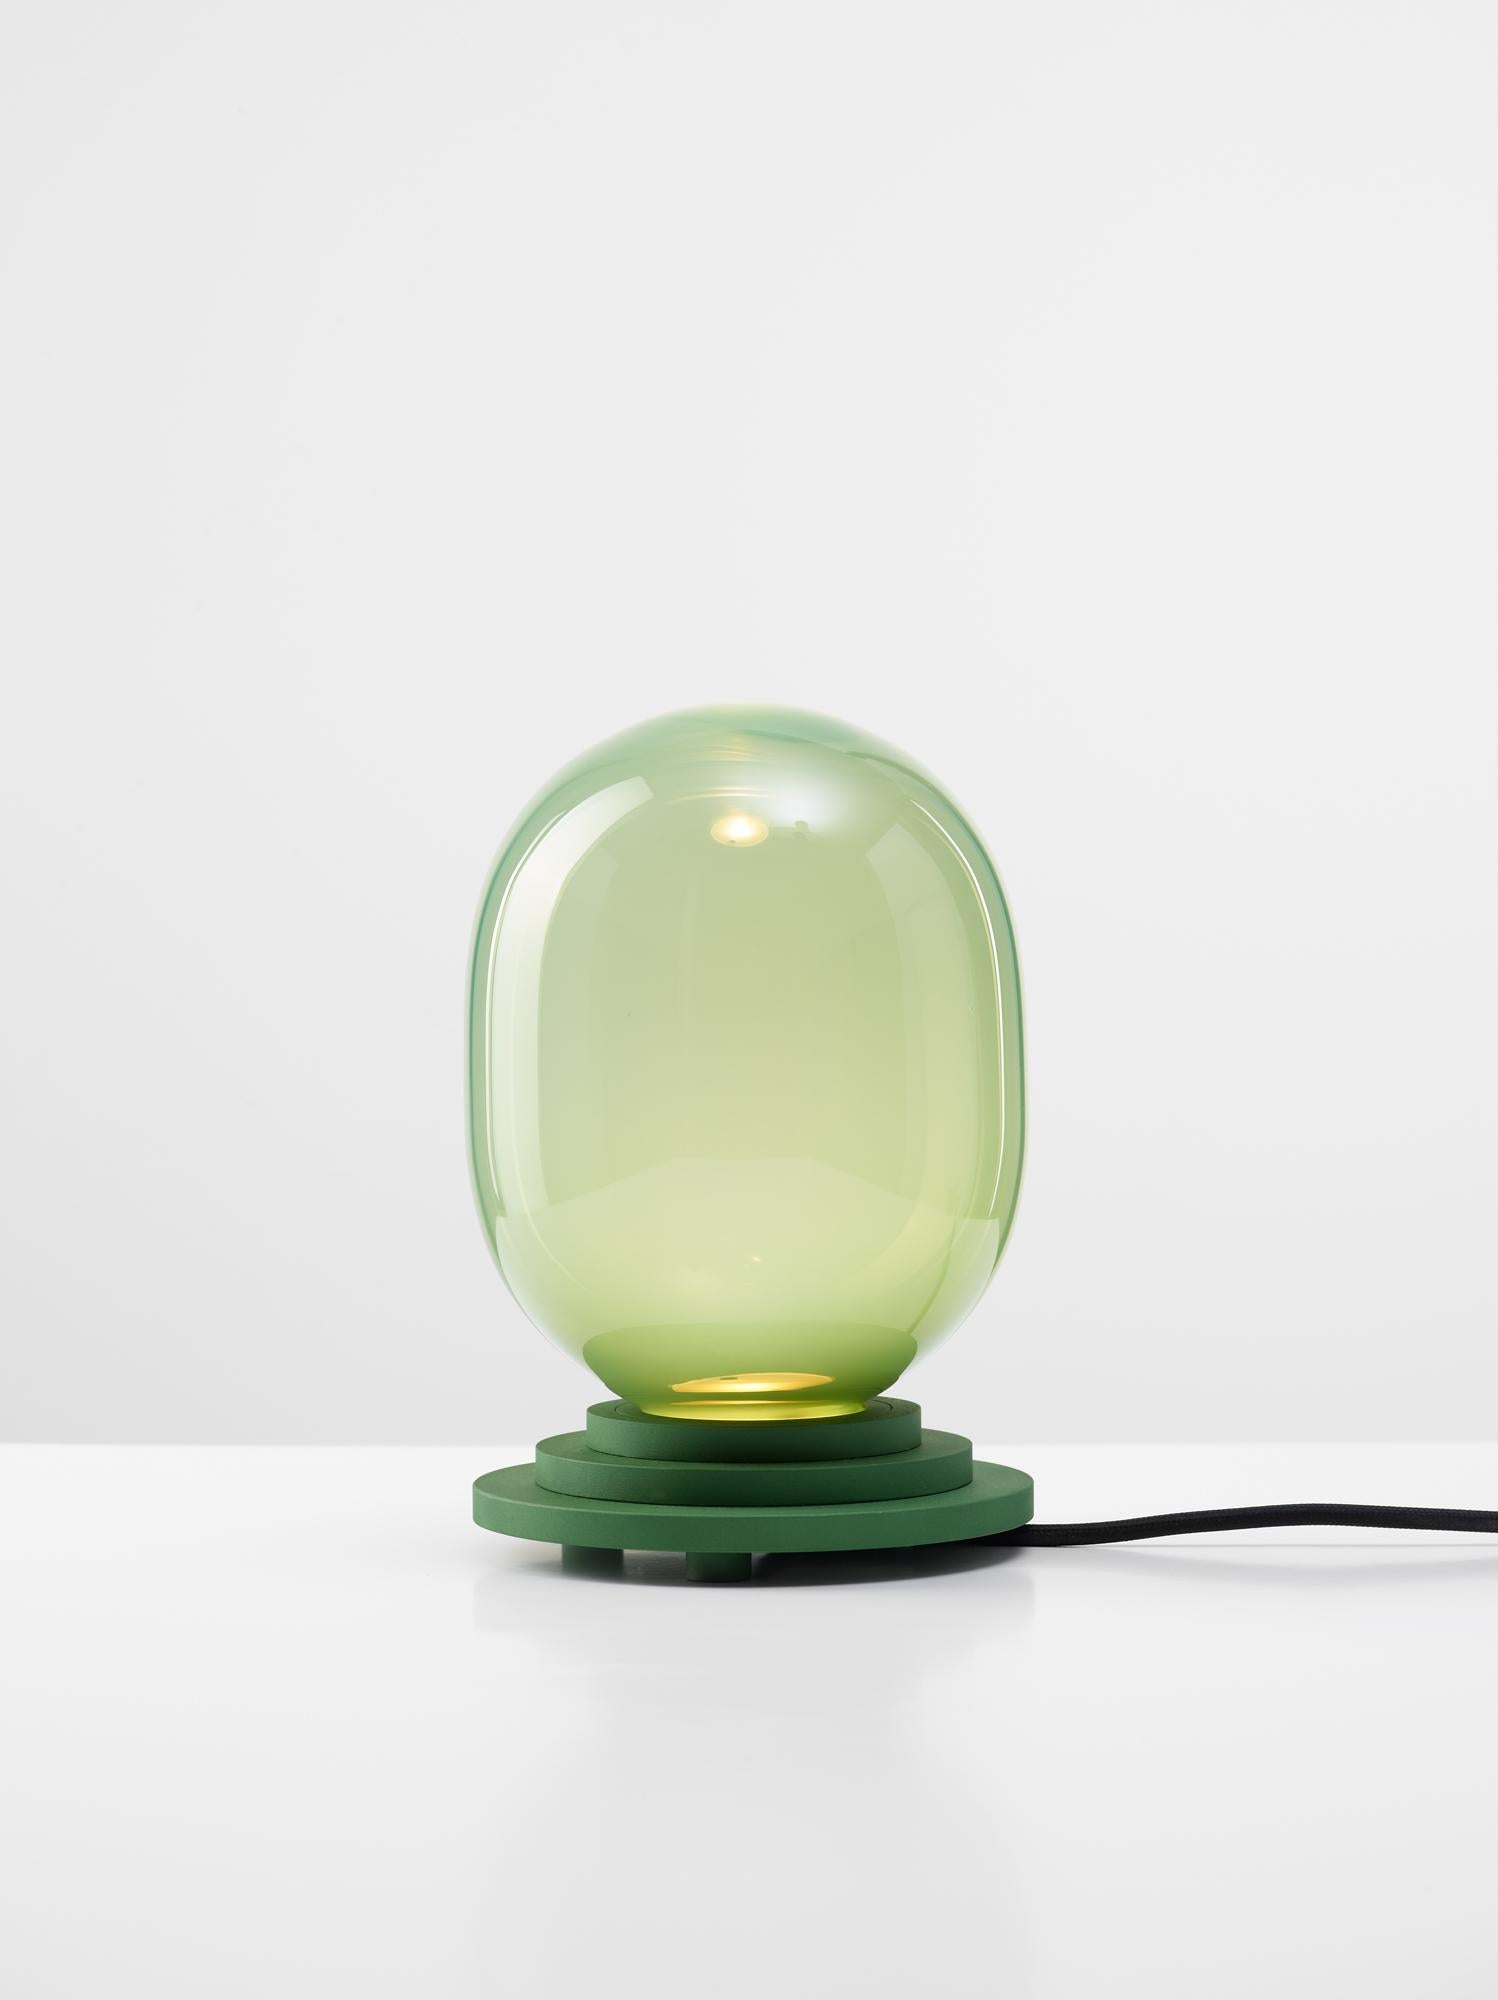 Green stratos capsule table light by Dechem Studio
Dimensions: D 15 x H 22 cm
Materials: Aluminum, glass.
Also available: Different colours available.

Different shapes of capsules and spheres contrast with anodized alloy fixtures, creating a